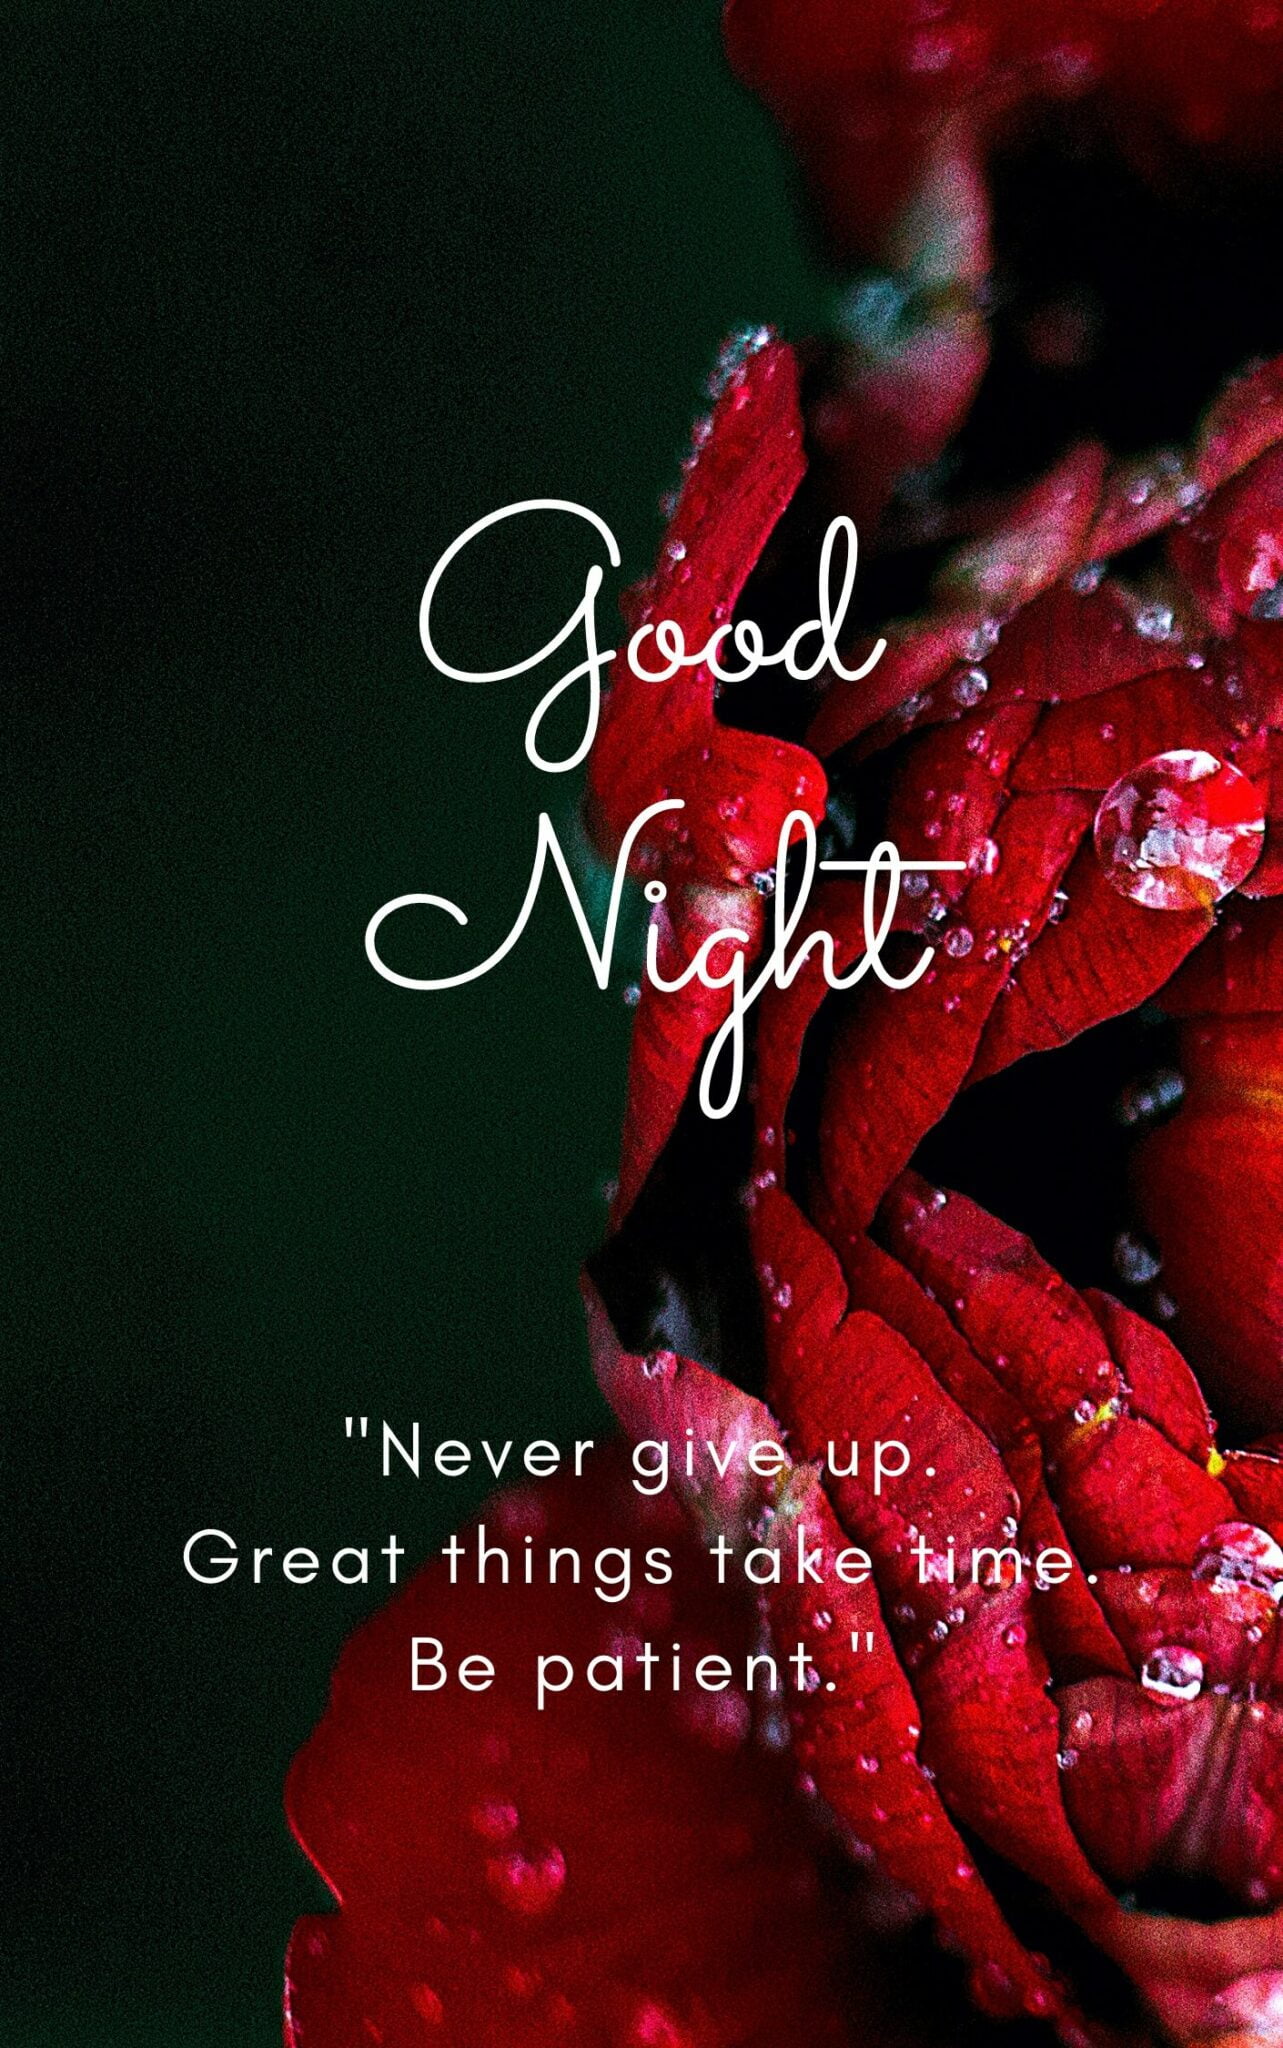 Good Night Quote Pic Never give up. Great things take time. Be patient